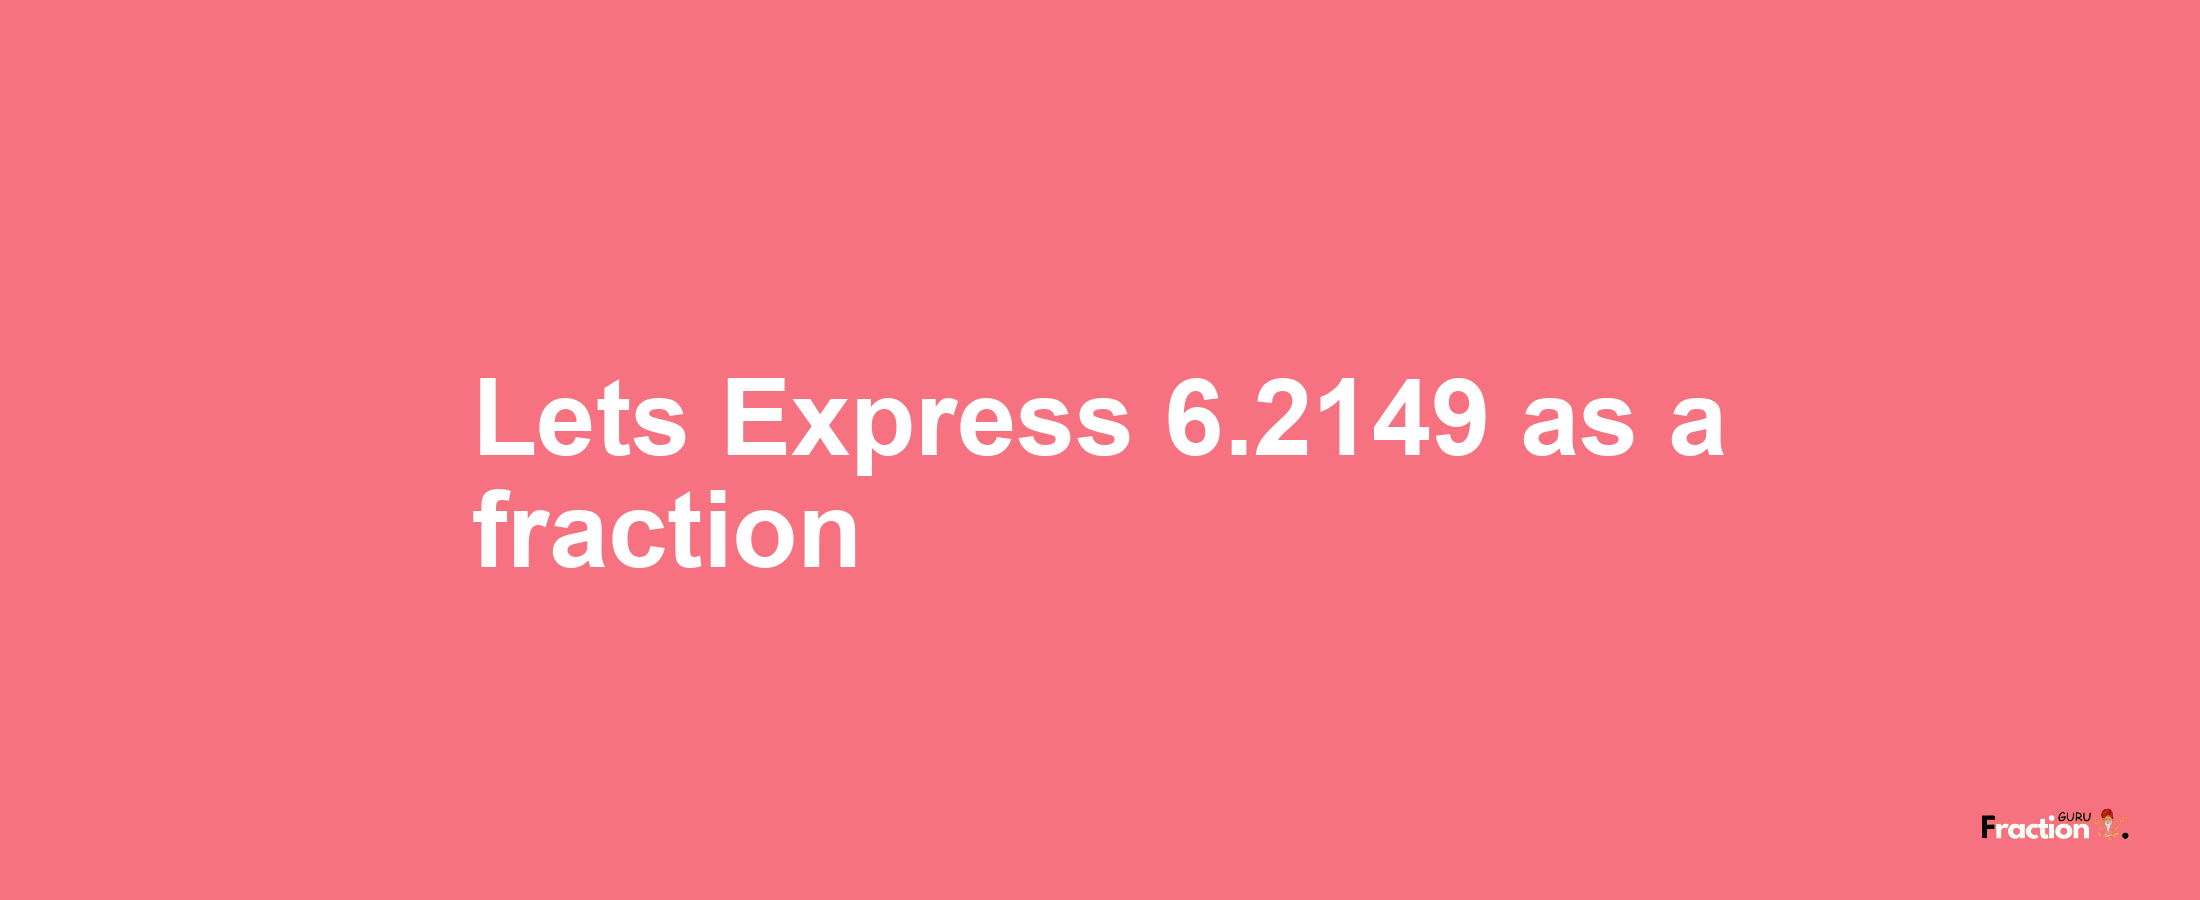 Lets Express 6.2149 as afraction